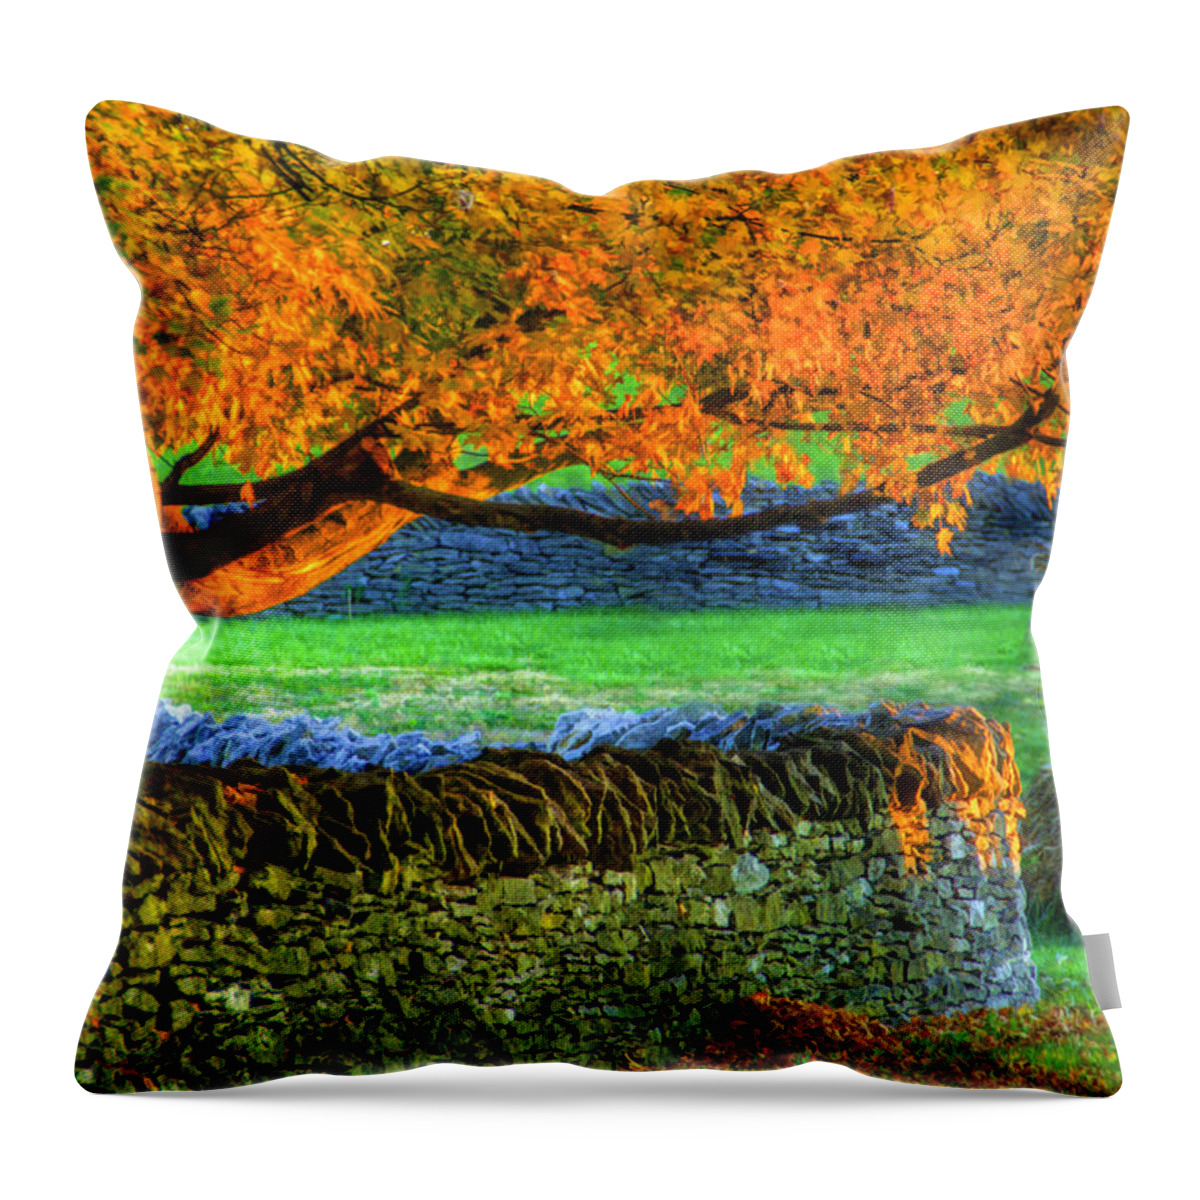 Shaker Throw Pillow featuring the photograph Shaker Stone Fence 1 by Sam Davis Johnson